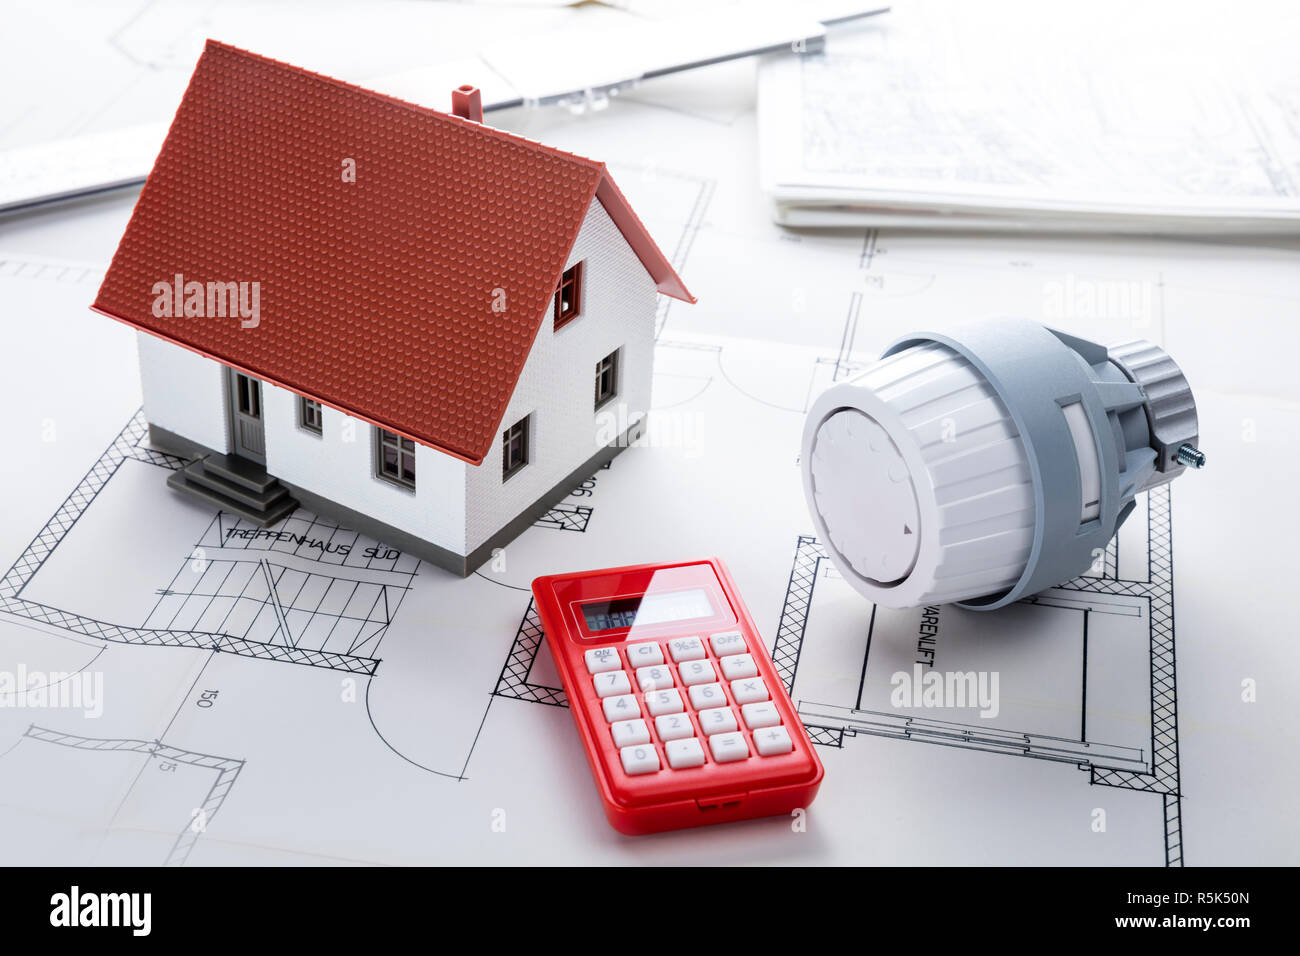 on a blueprint plan stand a house a thermostat regulator and small red calculator Stock Photo